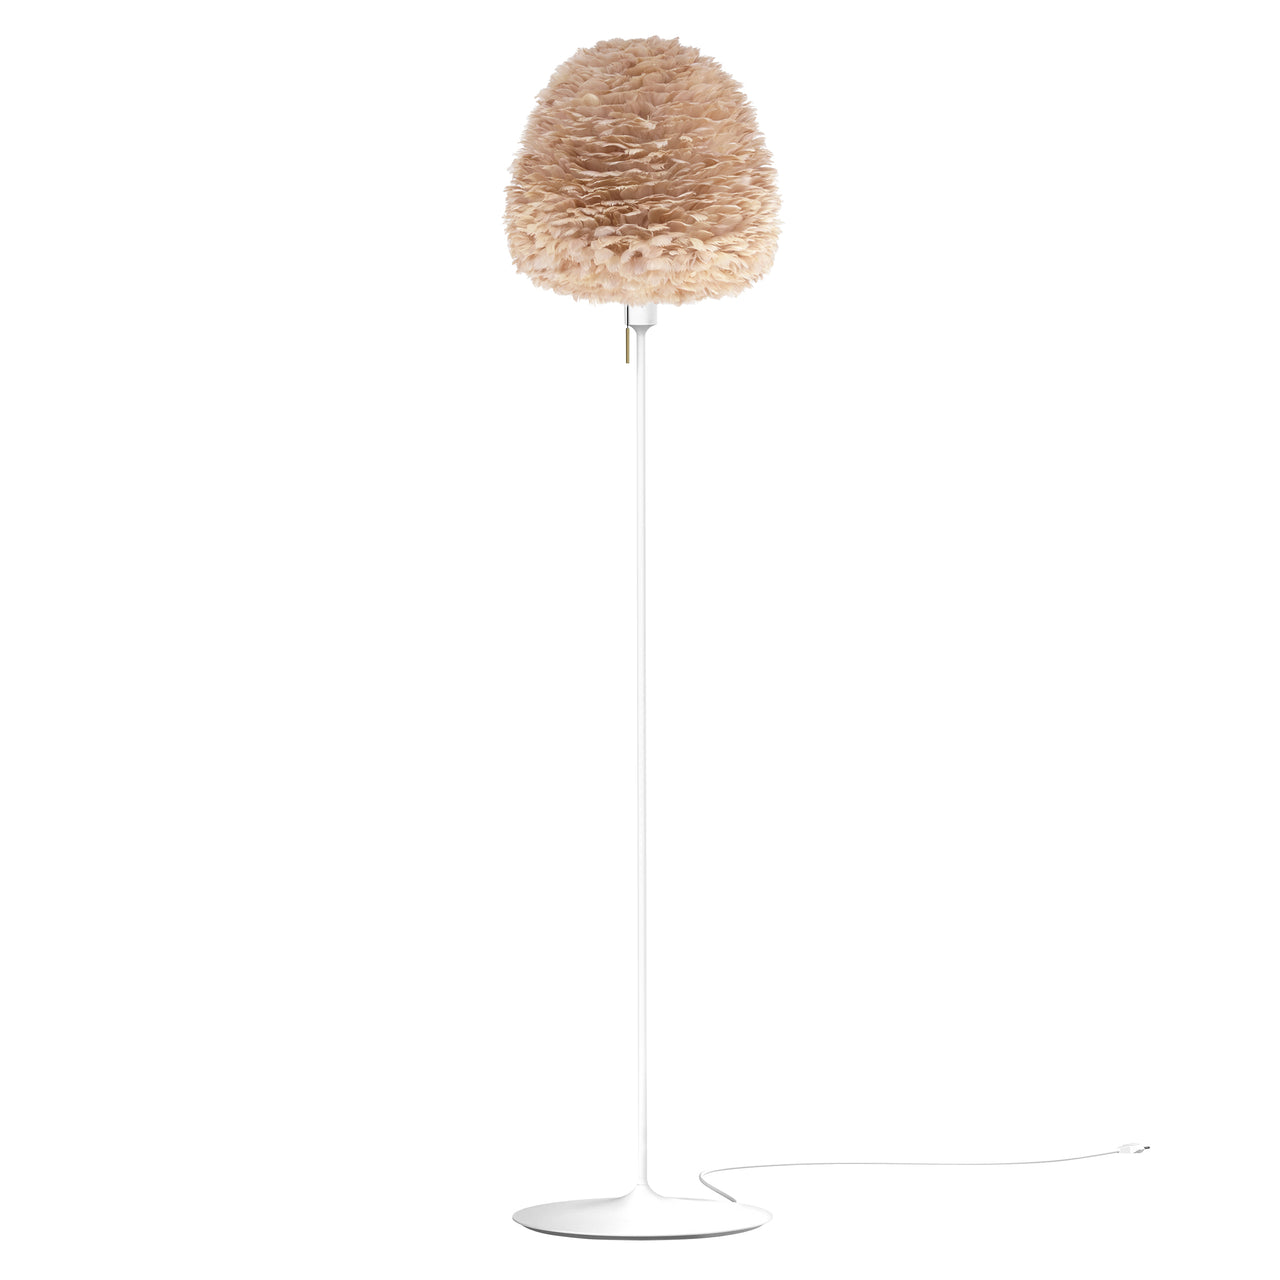 Eos Evia Champagne Floor Lamp: Large - 21.7